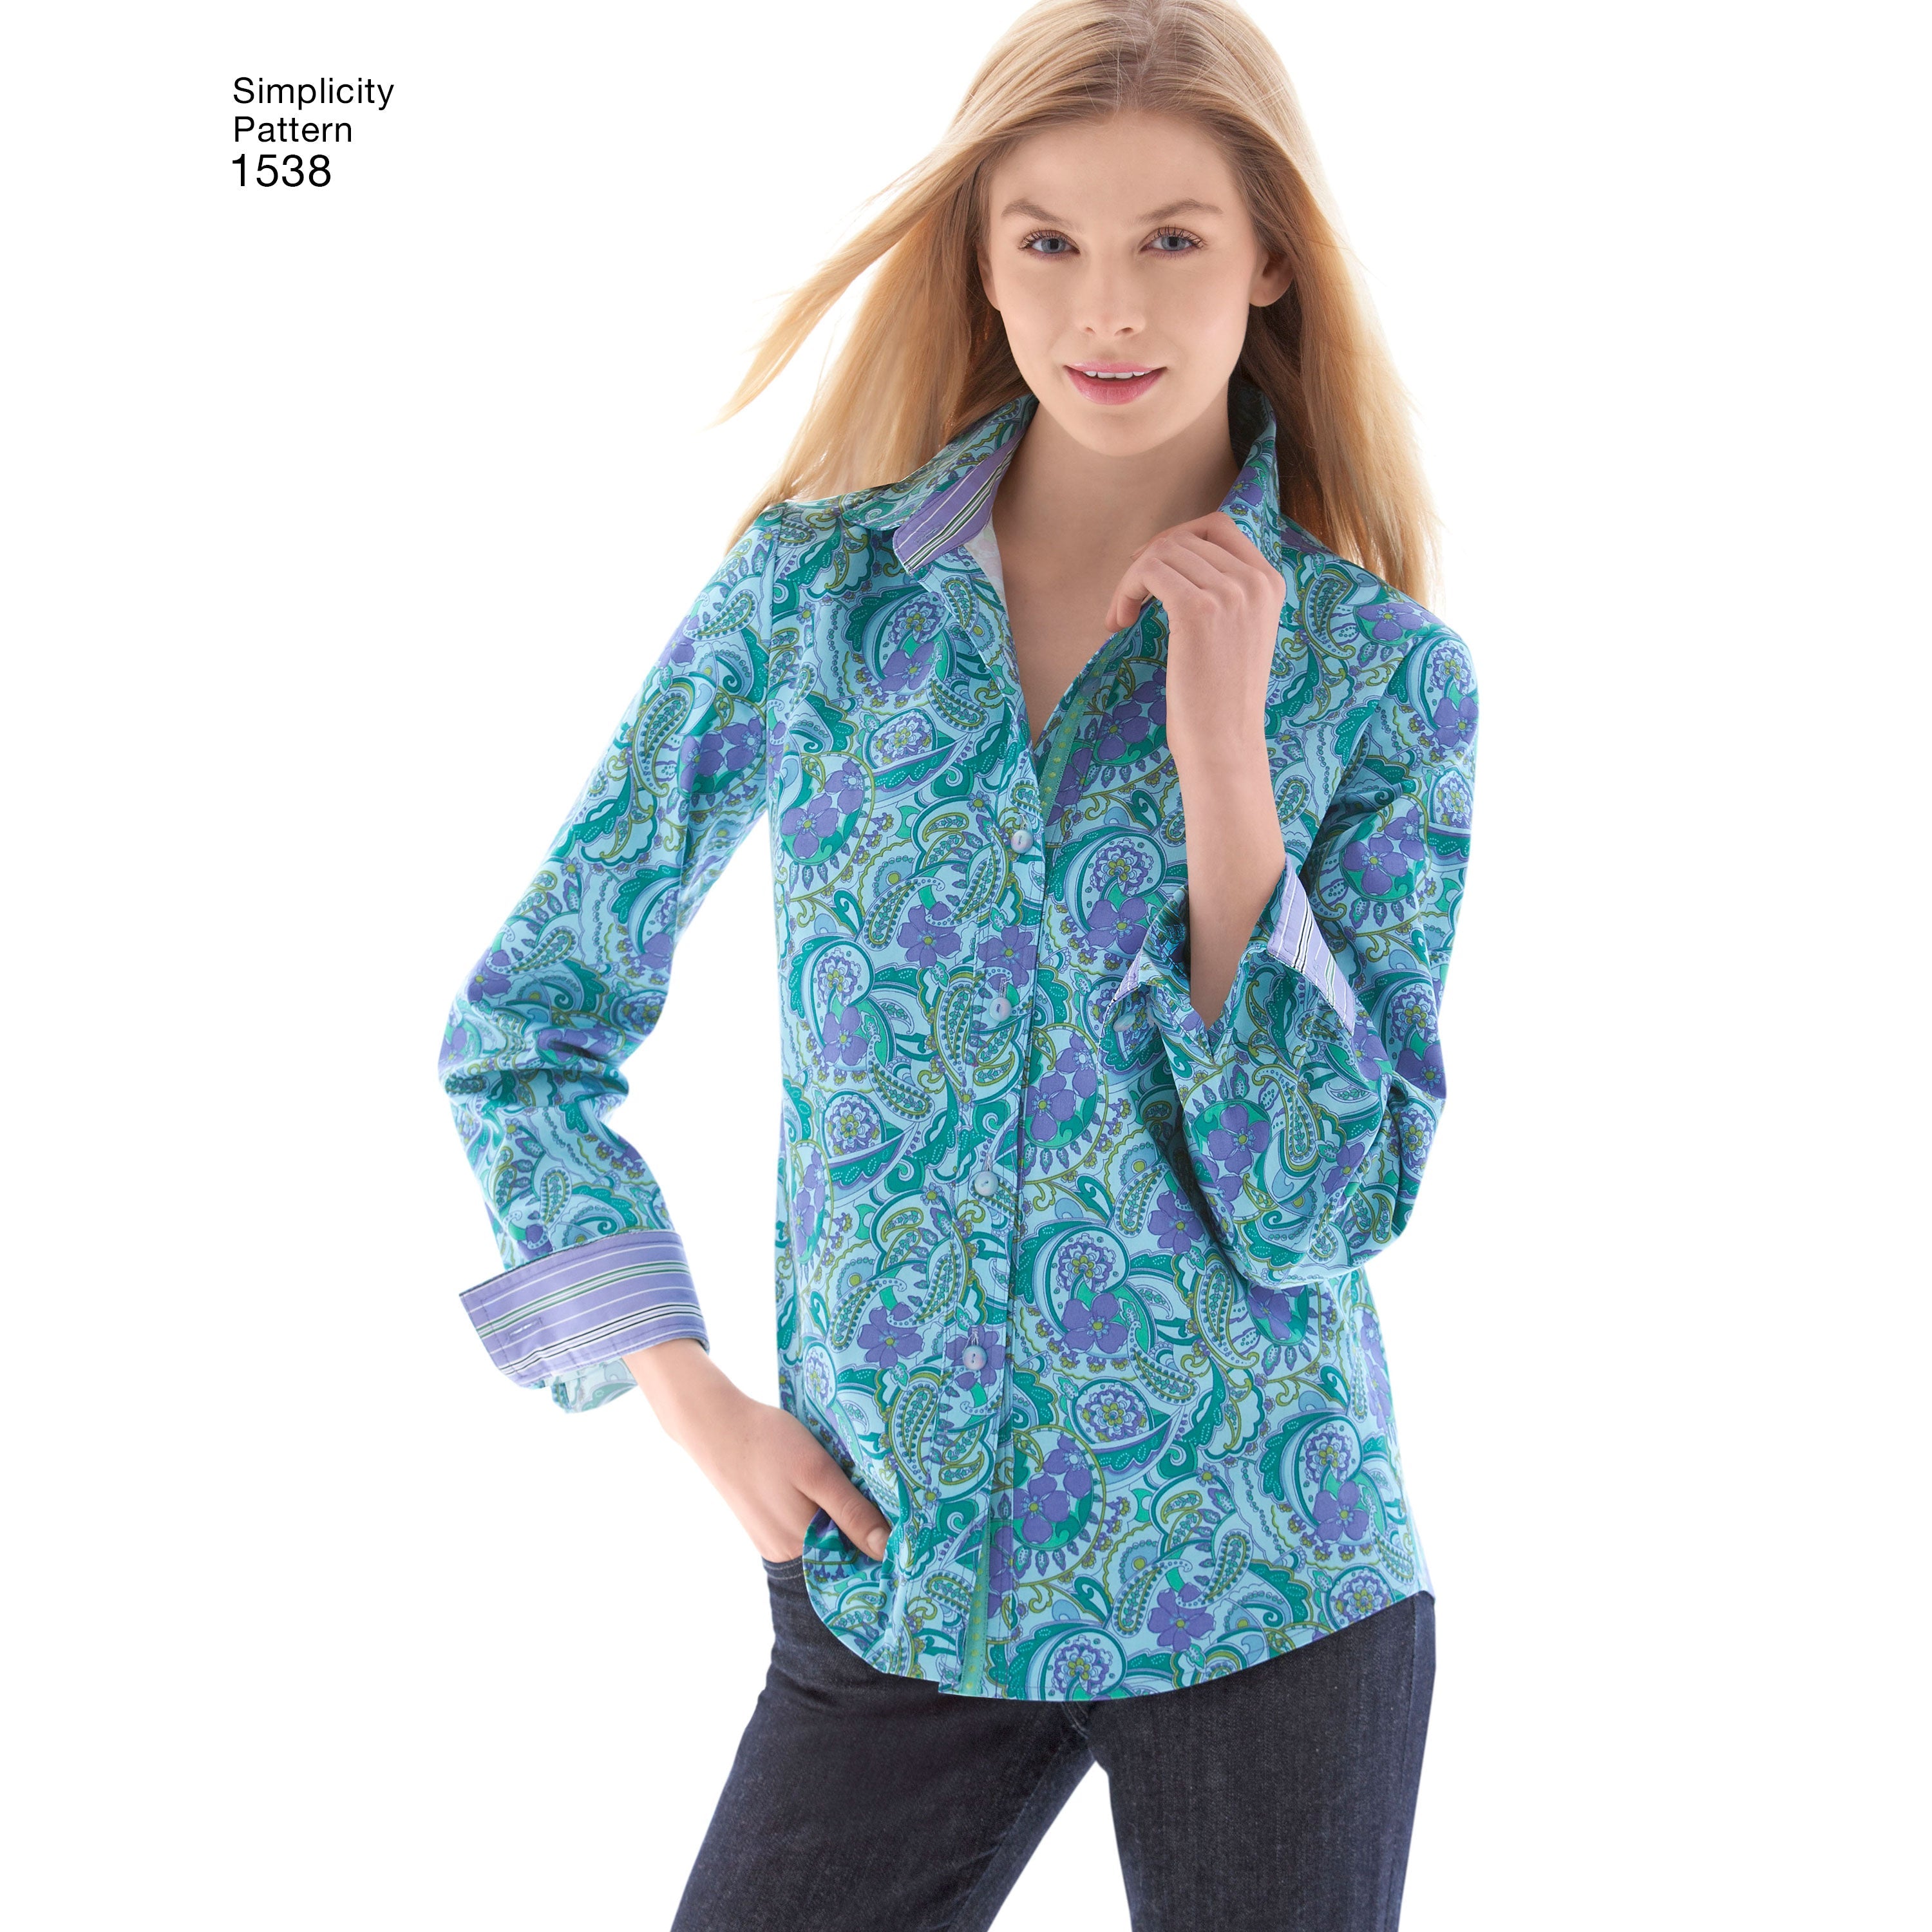 Simplicity Pattern 1538 Misses' shirt from Jaycotts Sewing Supplies